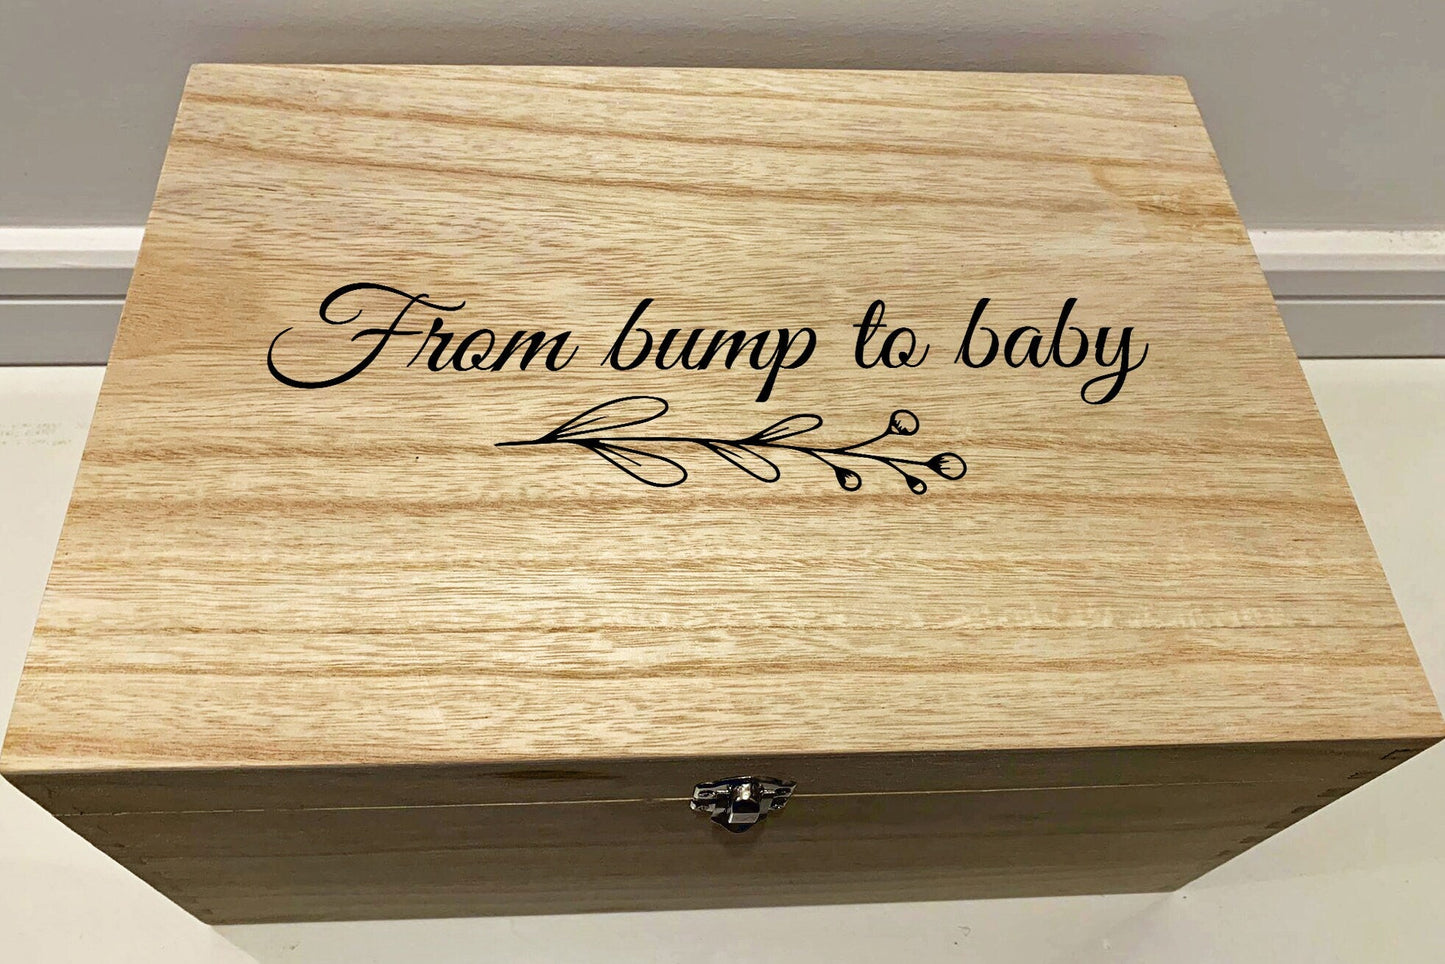 Large Personalised Engraved Wooden Keepsake Box, From Bump to Baby, Pregnancy Box - Resplendent Aurora